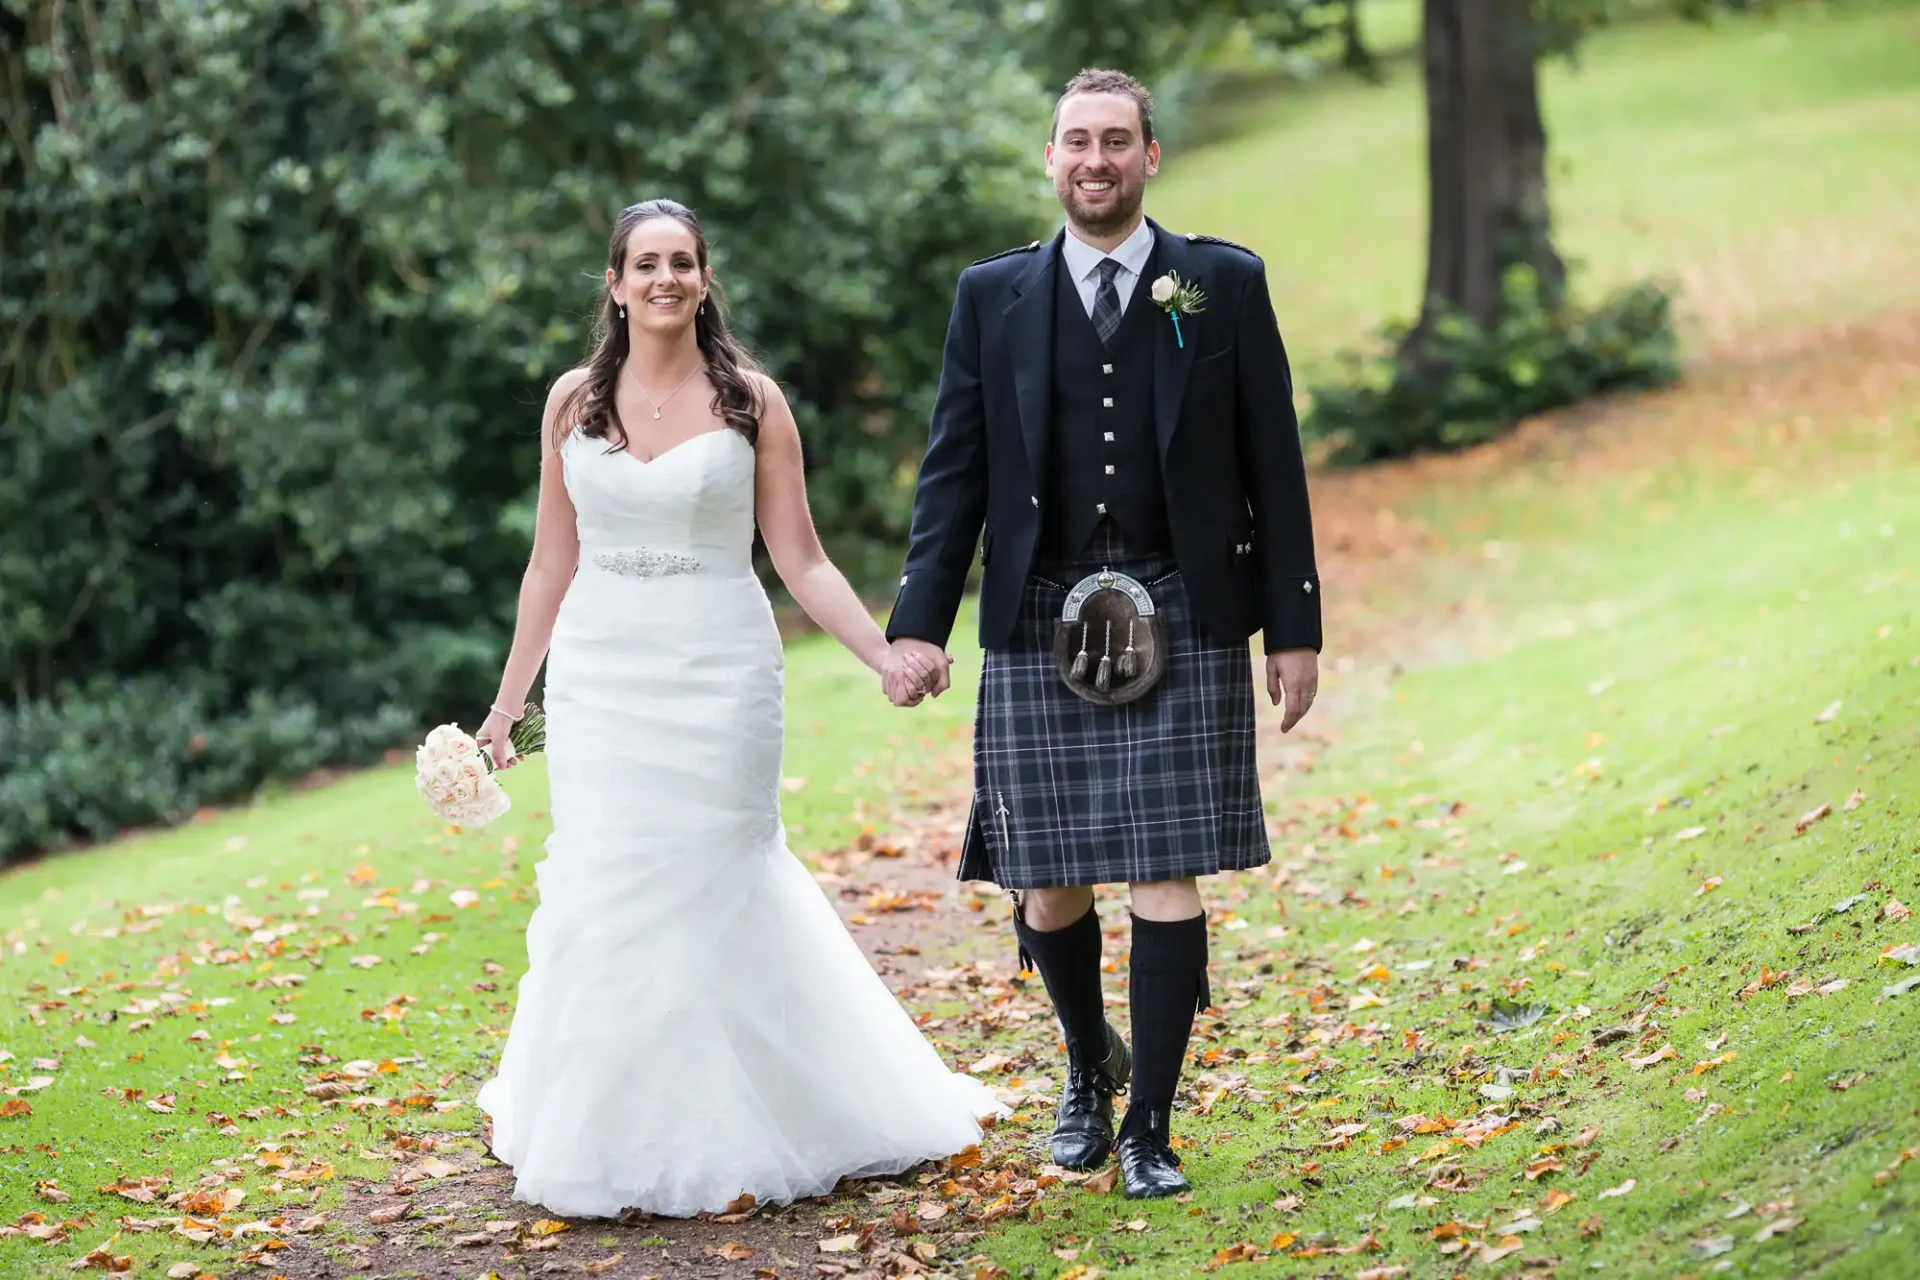 A bride in a white dress and a groom in a kilt holding hands and smiling while walking through a park with scattered fallen leaves.